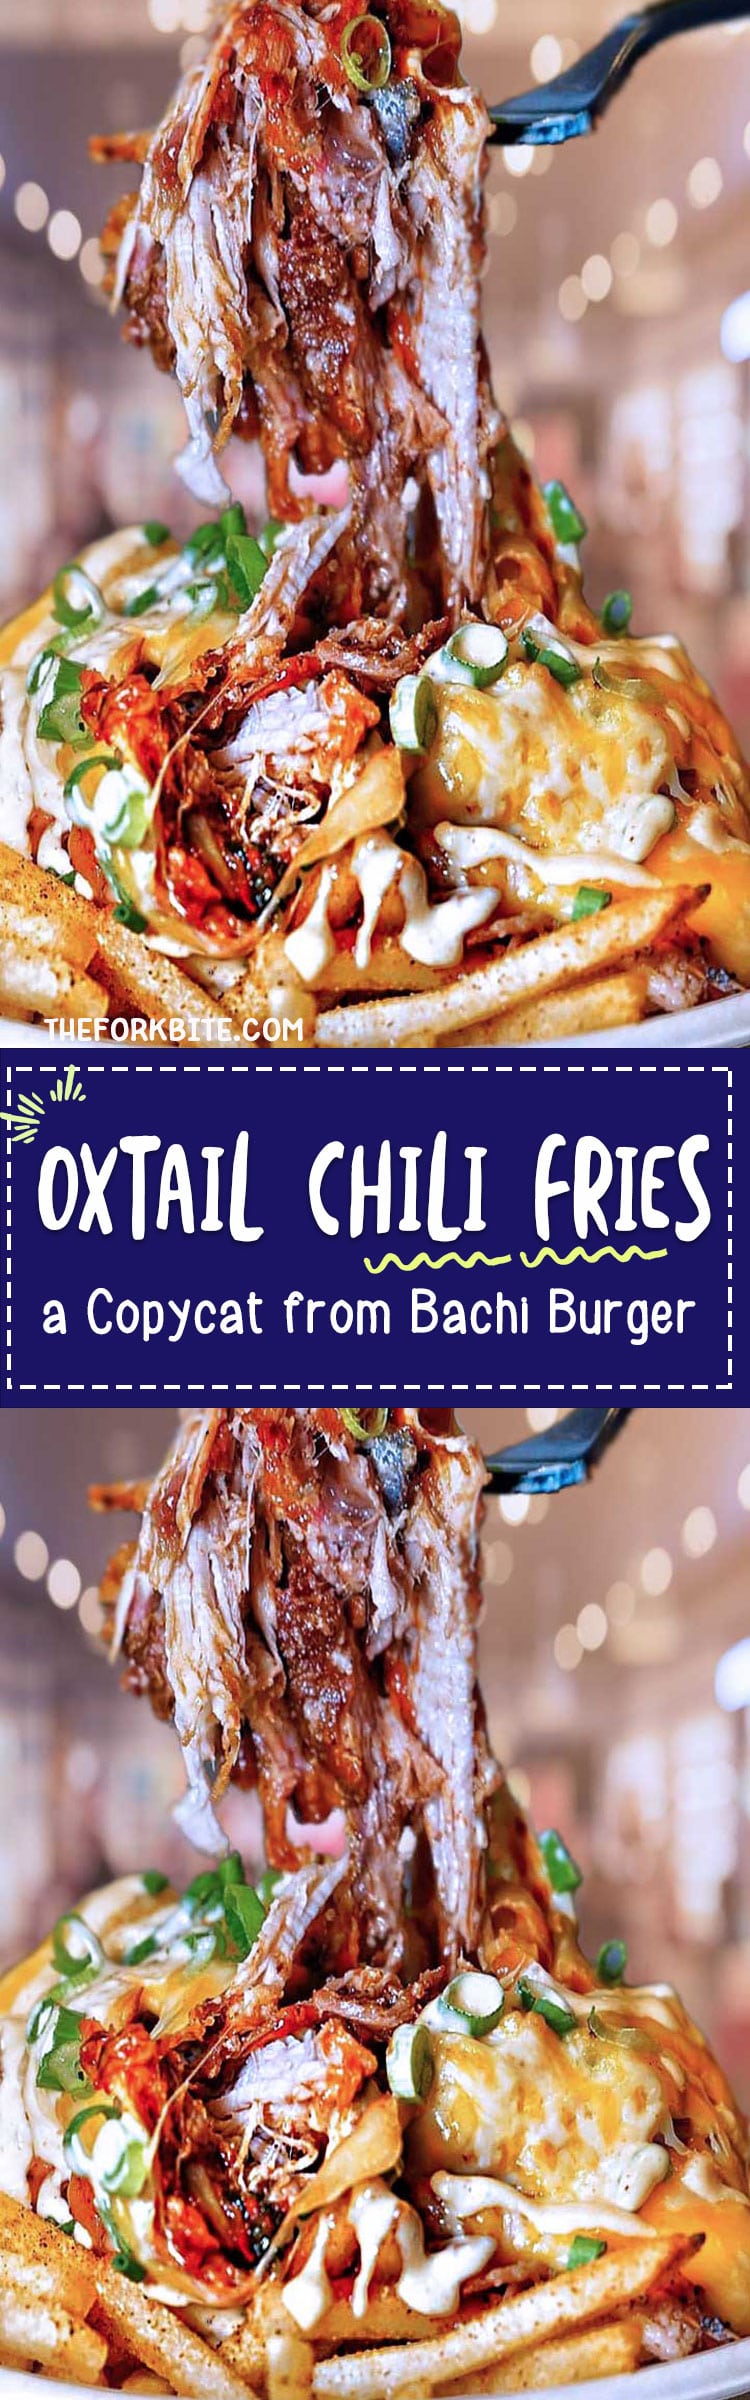 #OxtailChiliFries